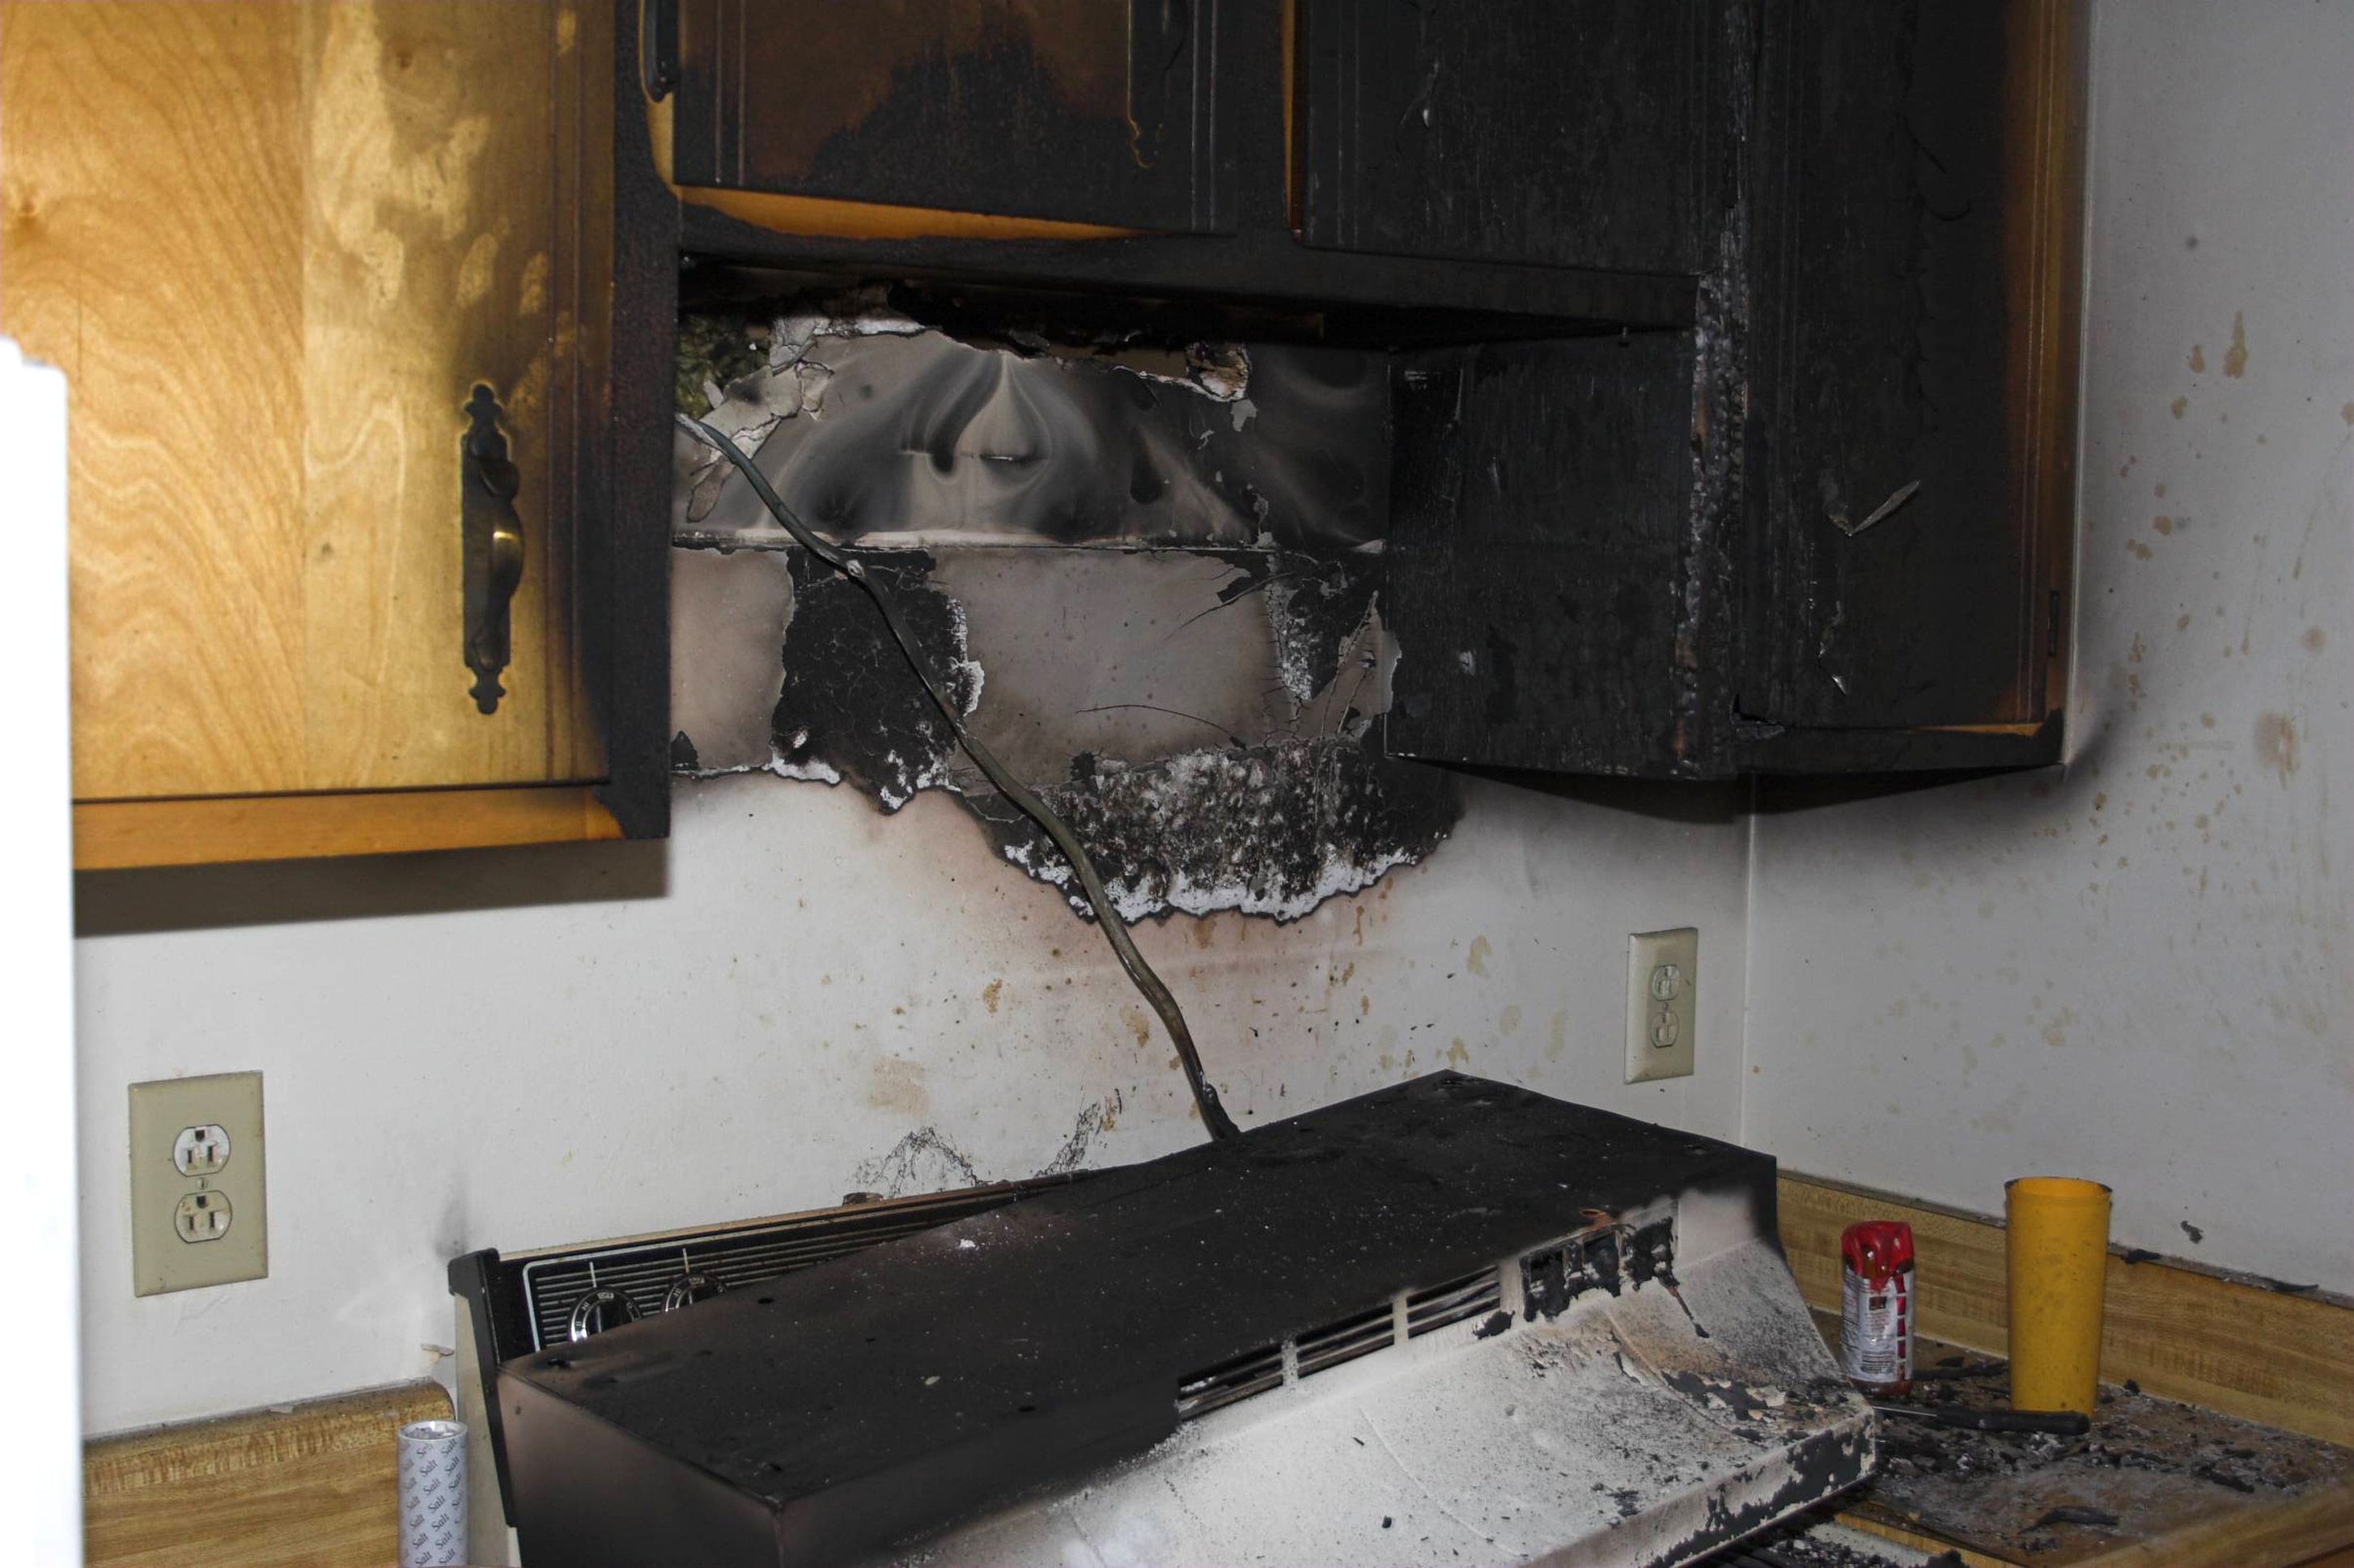 Home kitchen fire resulting in fire and smoke damage